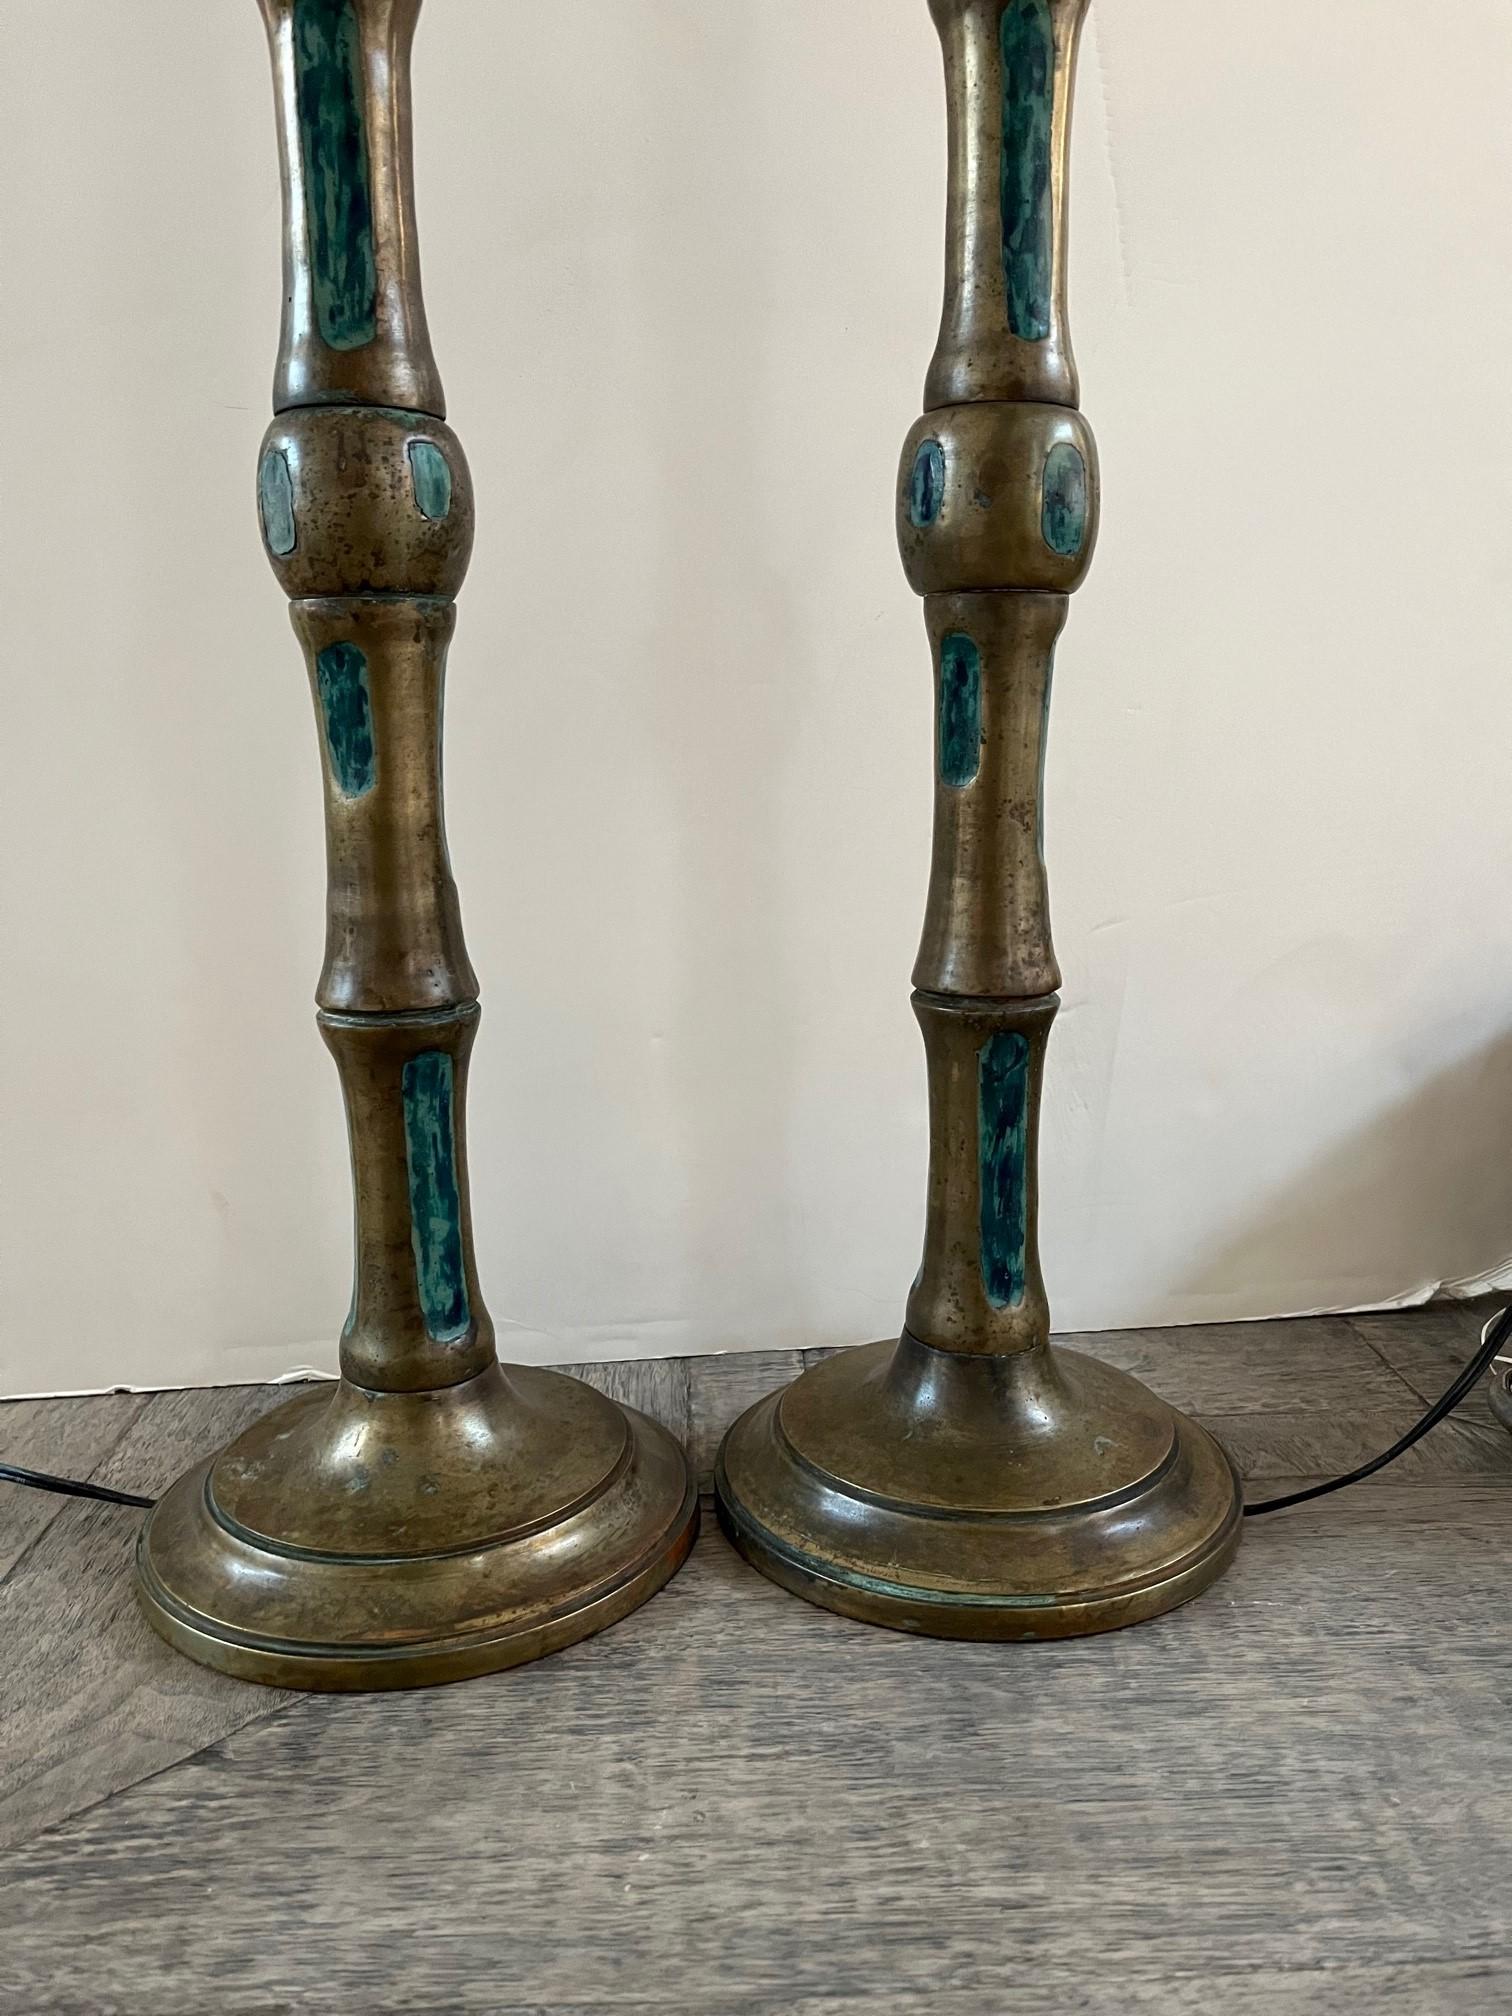 Pair of vintage bronze table lamps designed by Pepe Mendoza, designed with Faux Bamboo Stalk Motif in bronze, inlaid with enameled Turquoise Ceramic, Includes two matching silk shades,
In style Mid-Century Modern, on circular bases marking include